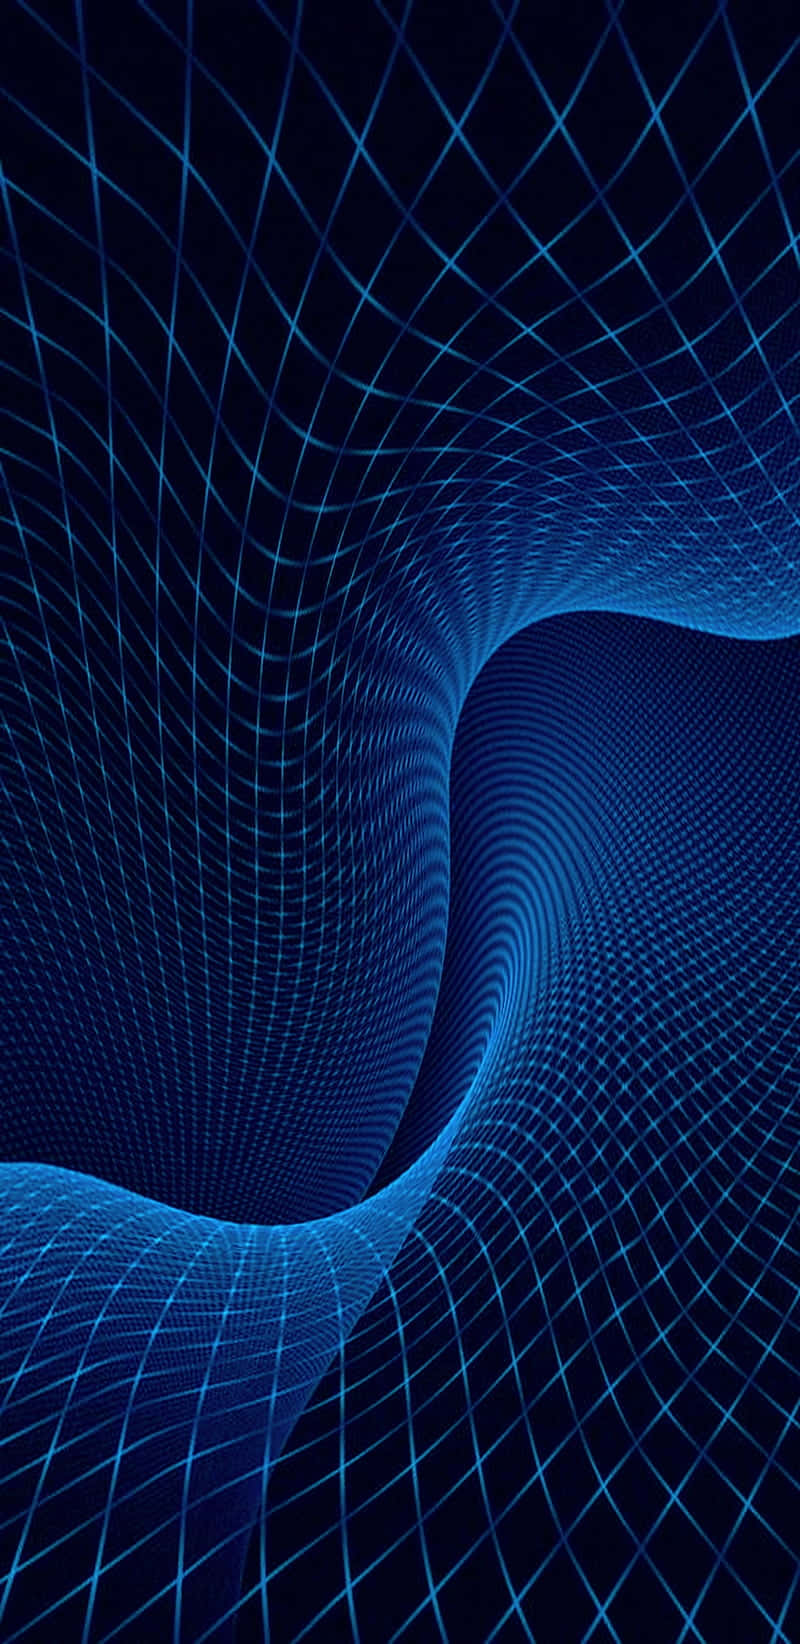 A Blue Abstract Background With A Wave Pattern